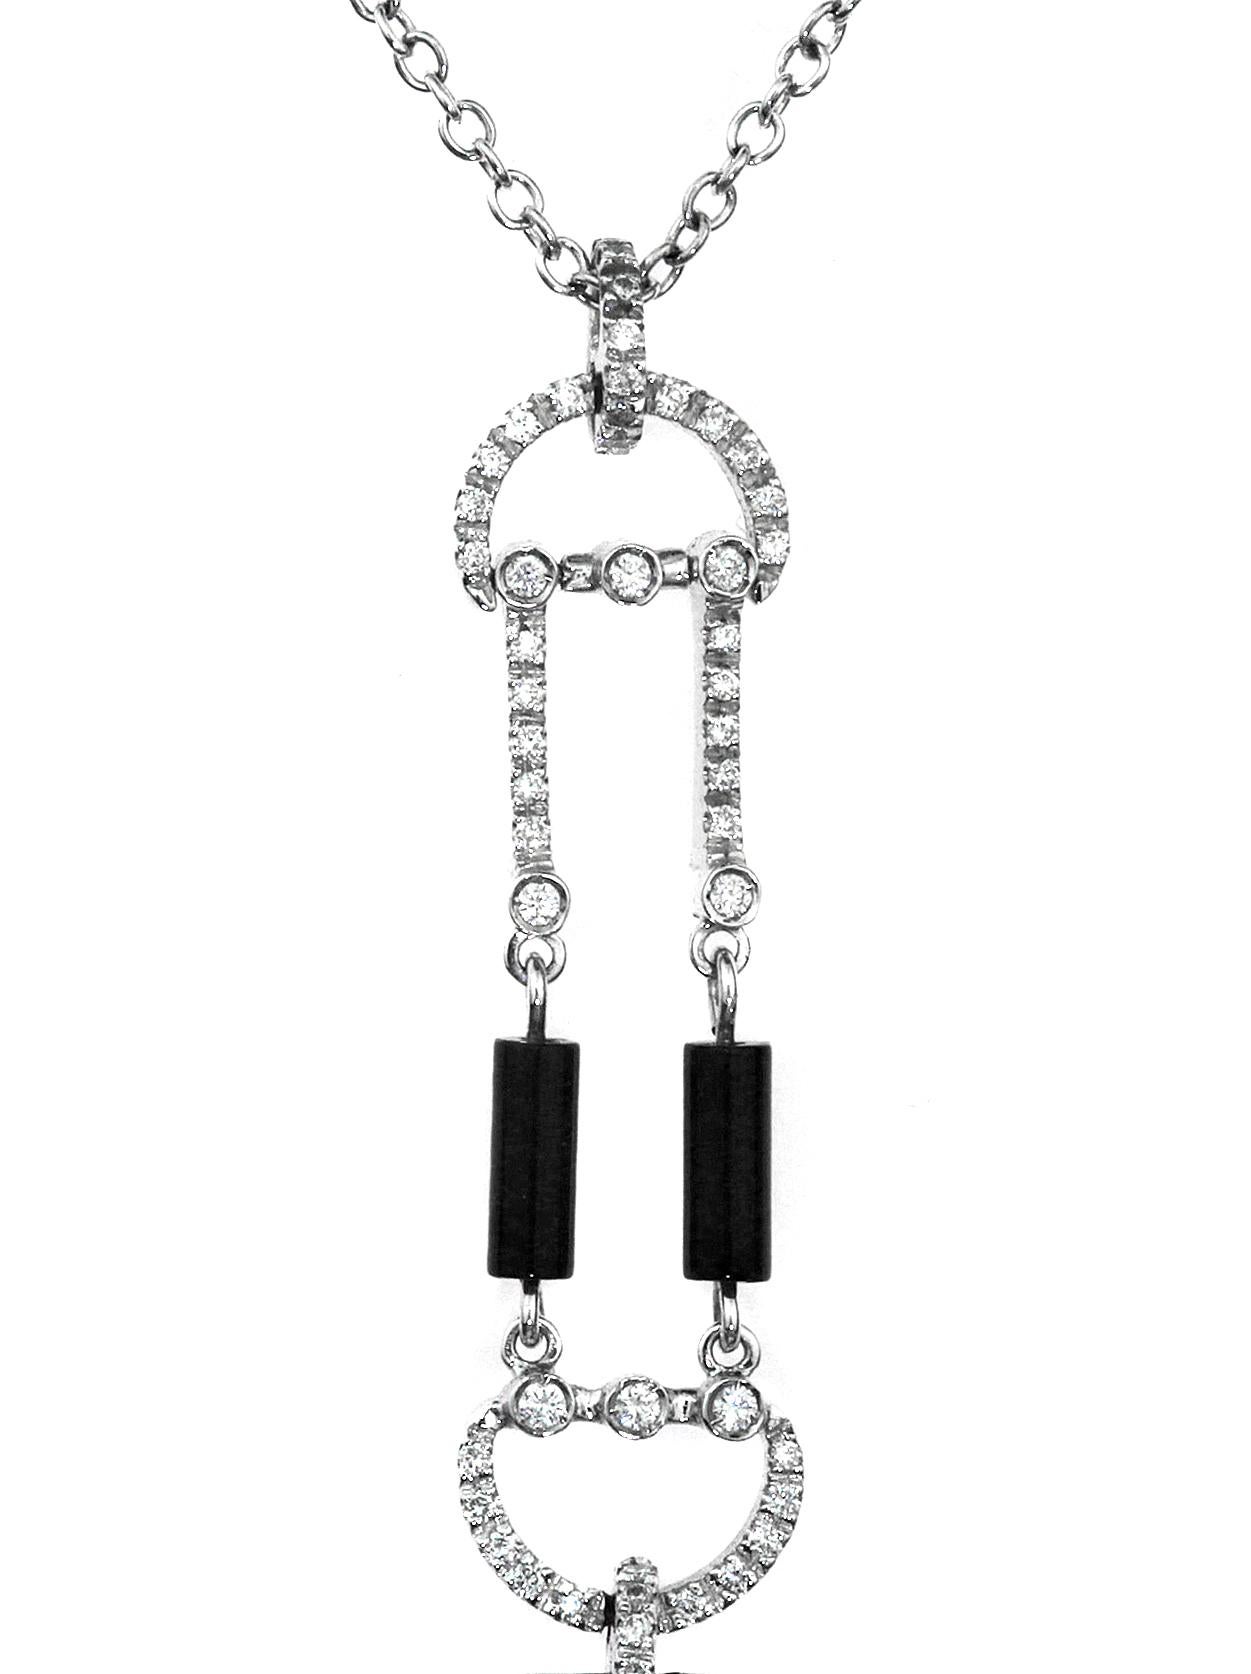 Women's Onyx and Diamond Drop Necklace/Chain with Pendant in 18K White Gold Hallmarked For Sale